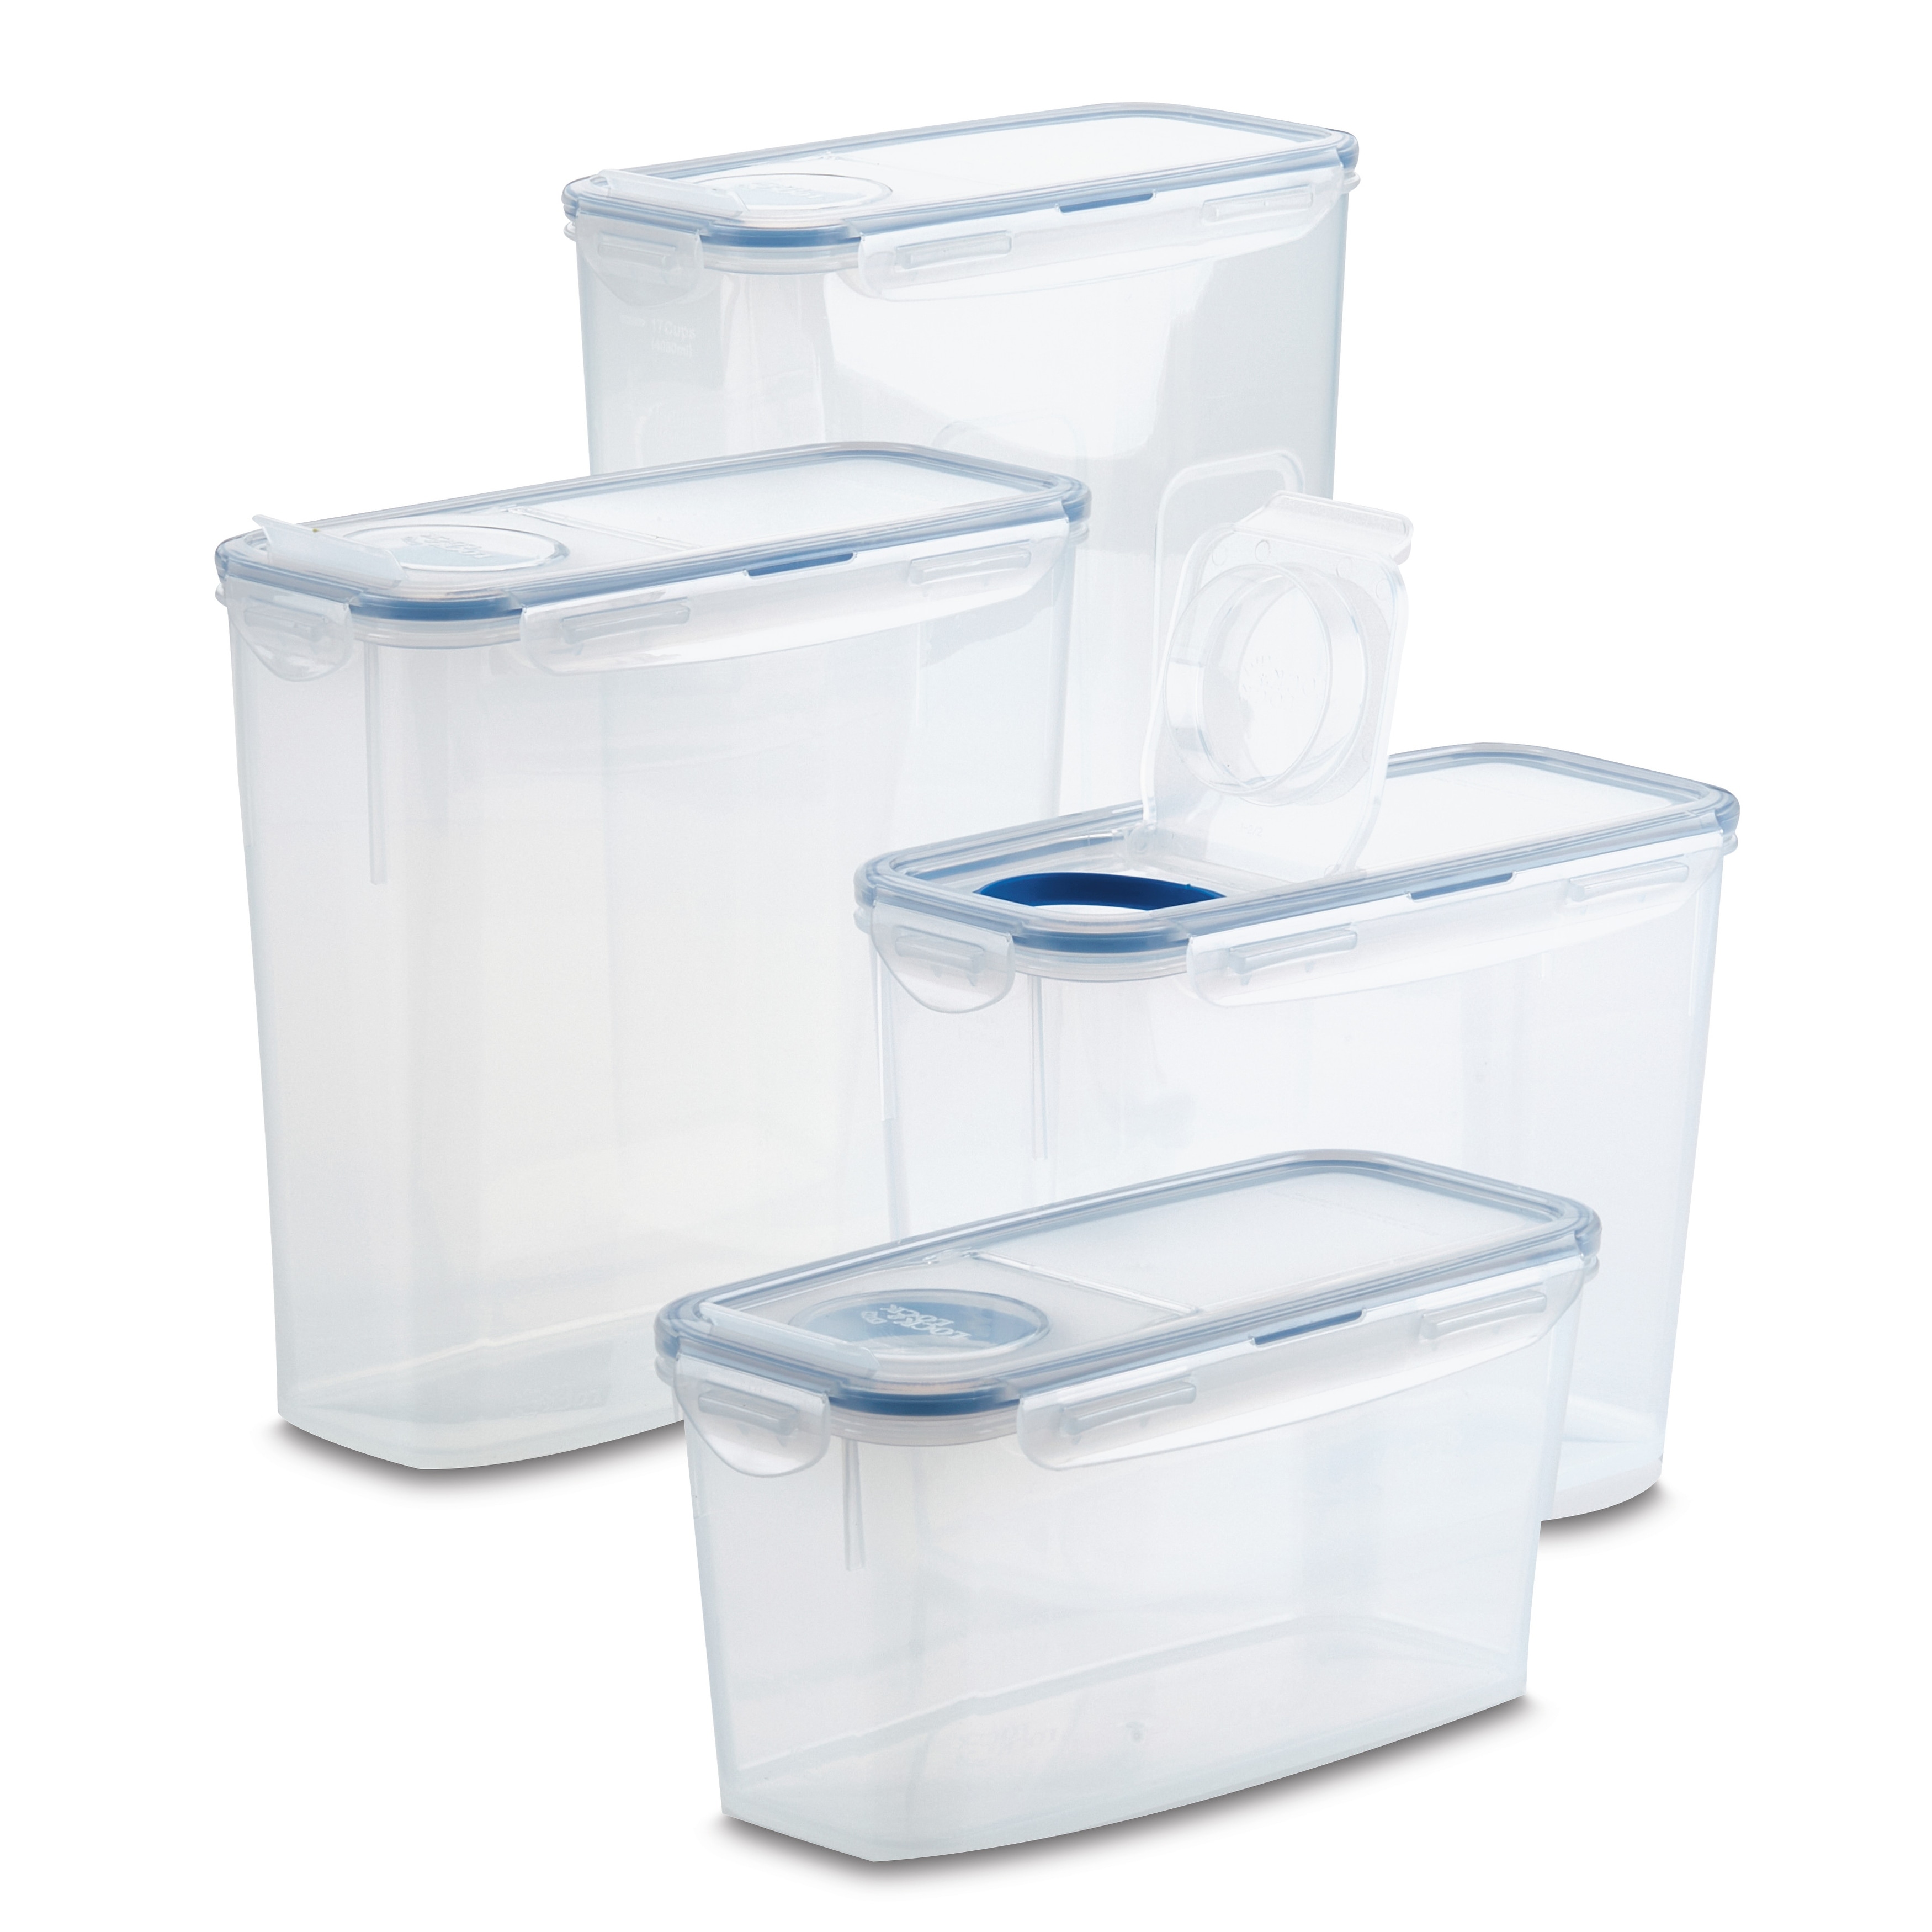 https://ak1.ostkcdn.com/images/products/is/images/direct/6d16965f75b9cc442e068efce7b5bba150dd2101/LocknLock-Pantry-Rectangular-Storage-Container-Set%2C-4-Piece%2C-Clear.jpg